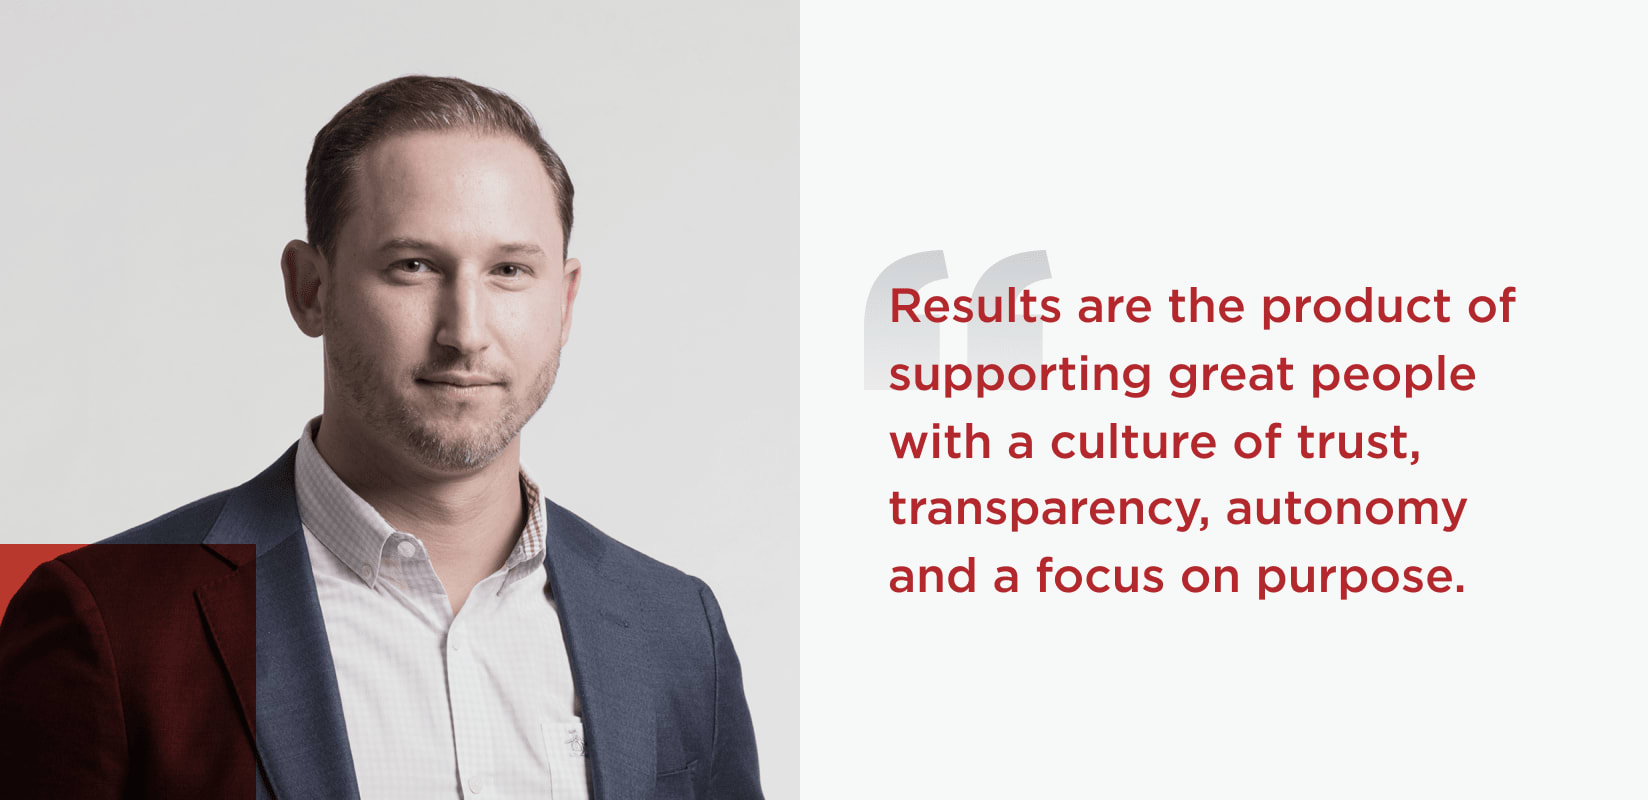 Quote from John Cannava, Senior Vice President, Chief Information Officer. Results are the product of supporting great people with a culture of trust, transparency, autonomy and a focus on purpose.